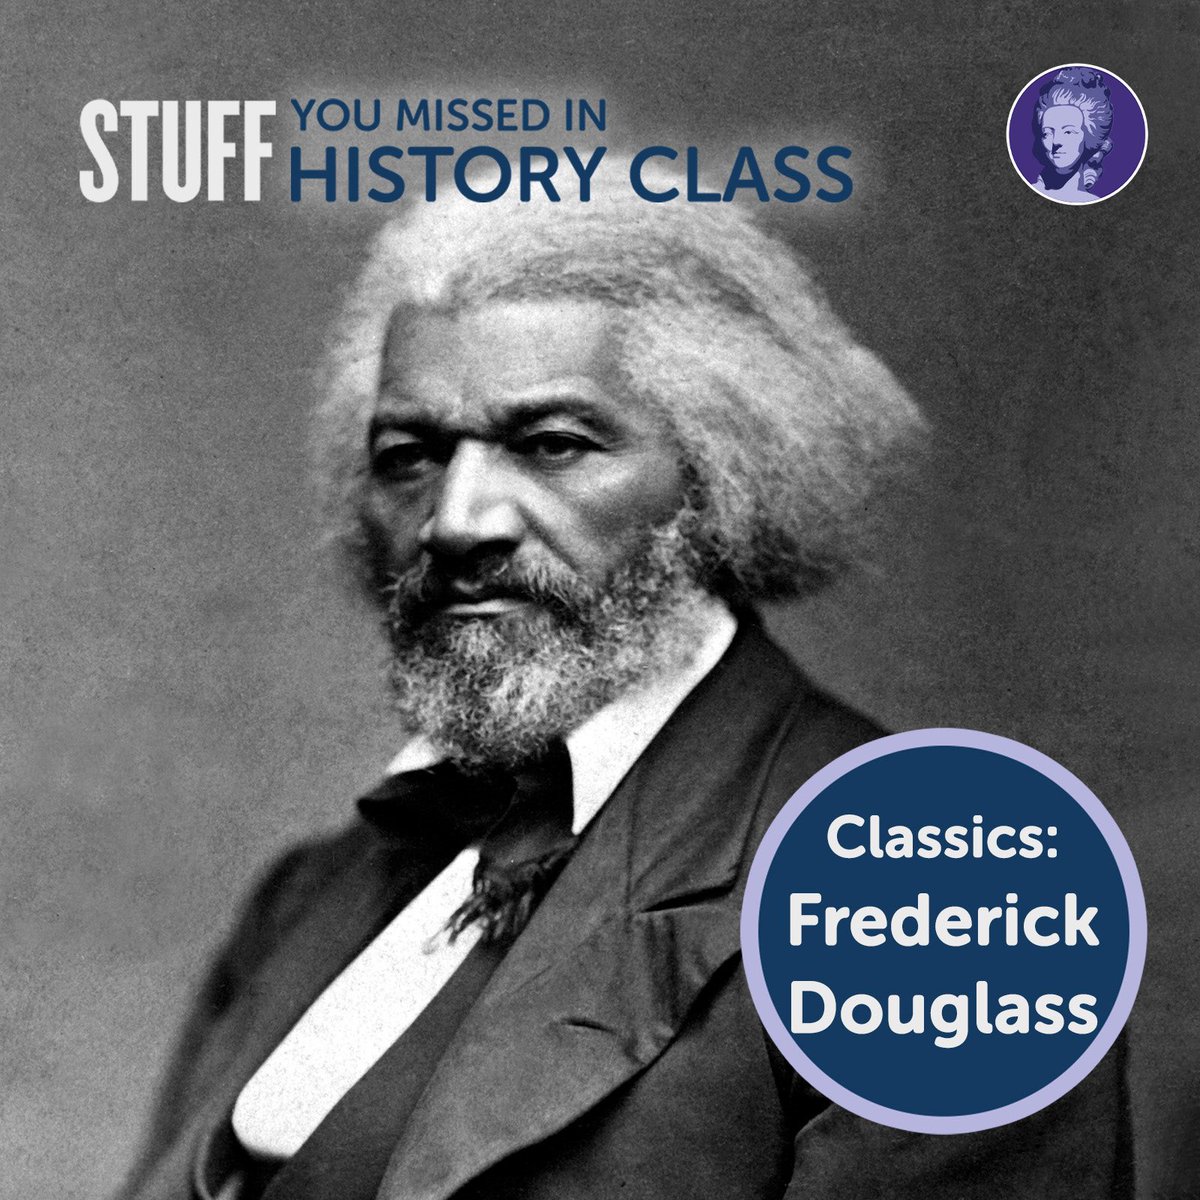 This 2017 episode covers orator, writer, statesman and social reformer Frederick Douglass. His early life shaped the advocate he became, and informed the two primary causes he campaigned for - the abolition of slavery and women's suffrage.

https://t.co/BV3QxfVZFw https://t.co/oAEvxYZacC